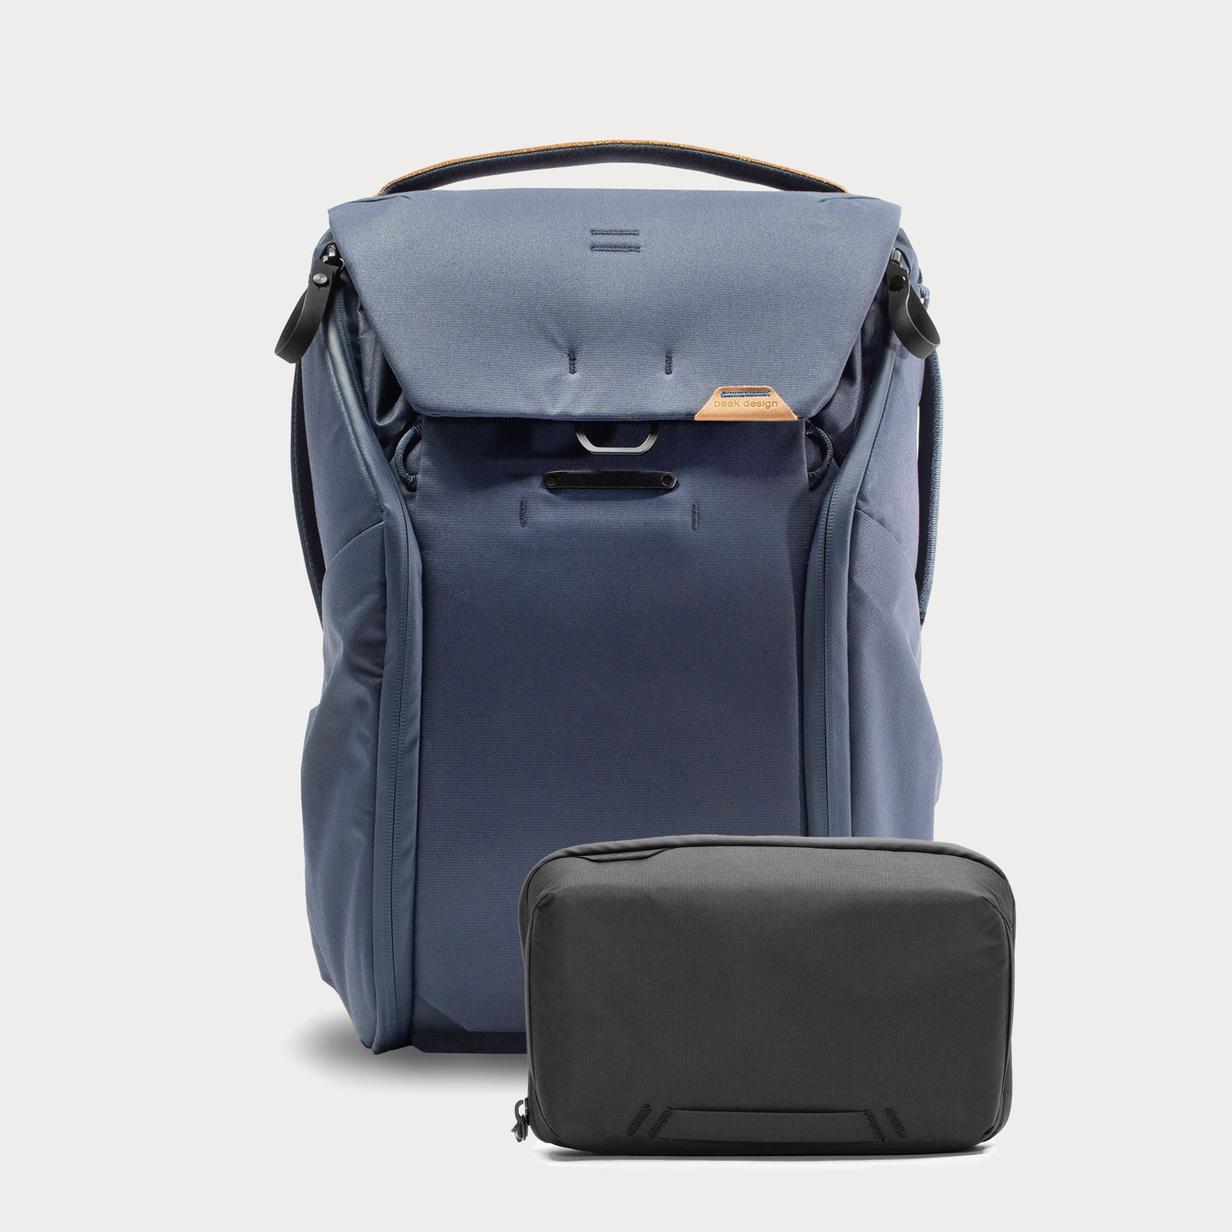 Moment Everyday Backpack 20 L and Tech Pouch Bundle 01